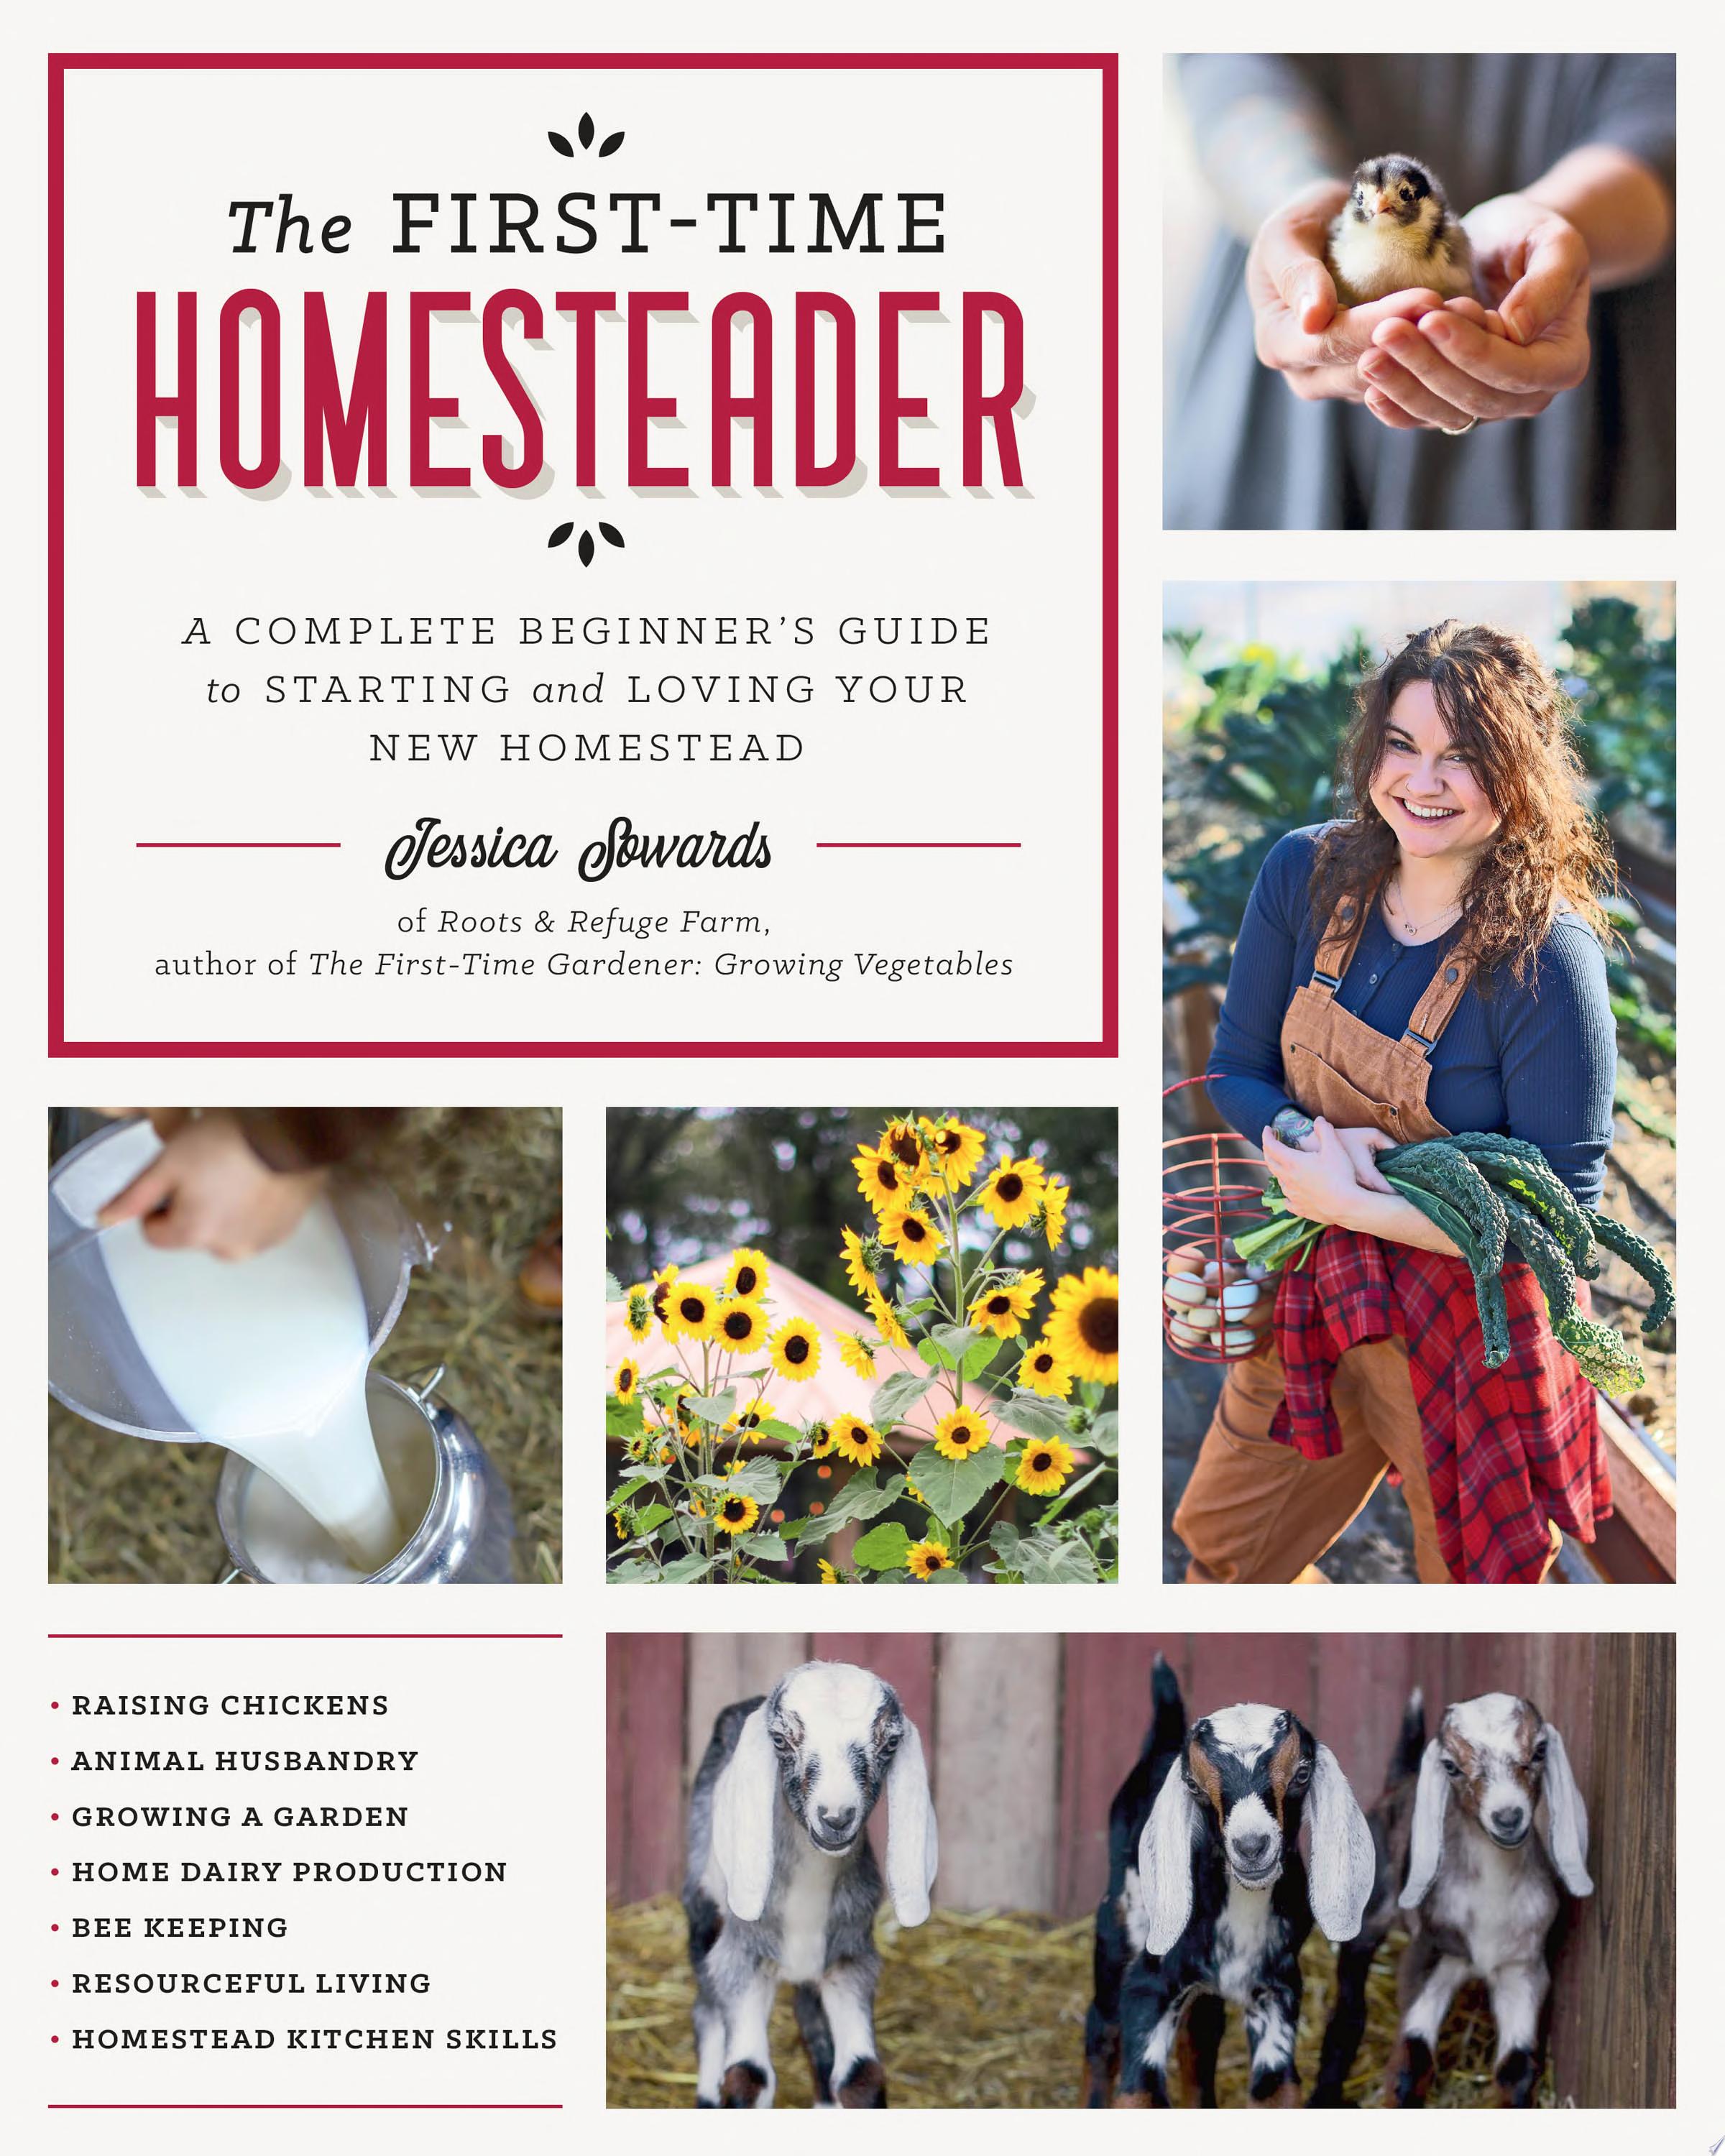 Image for "The First-Time Homesteader"